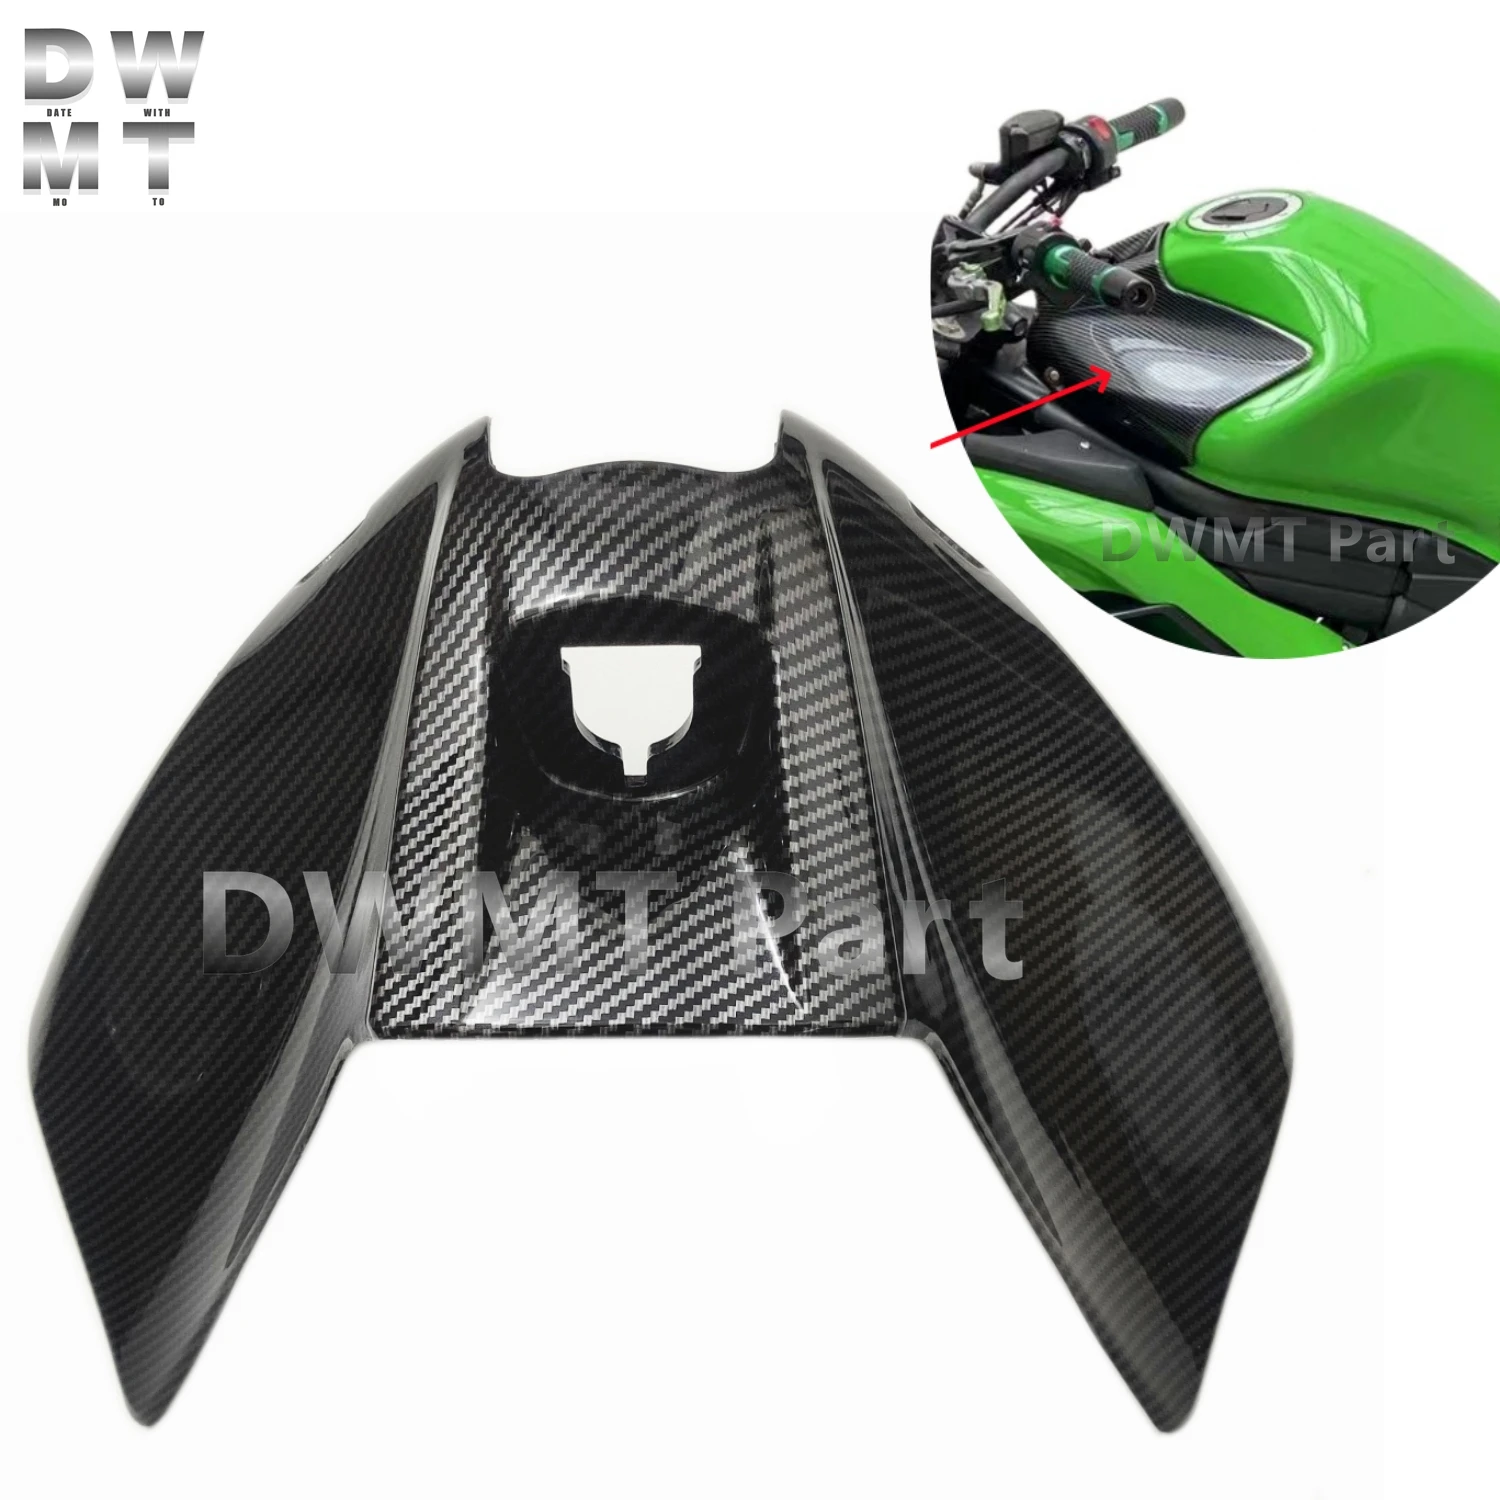 

ABS Plastic Fuel Tank Cover For KAWASAKI Ninja ER6N ER-6N 2012 2013 2014 2015 2016 Top Gas Tank Cover Mid Fairing Front Cowl